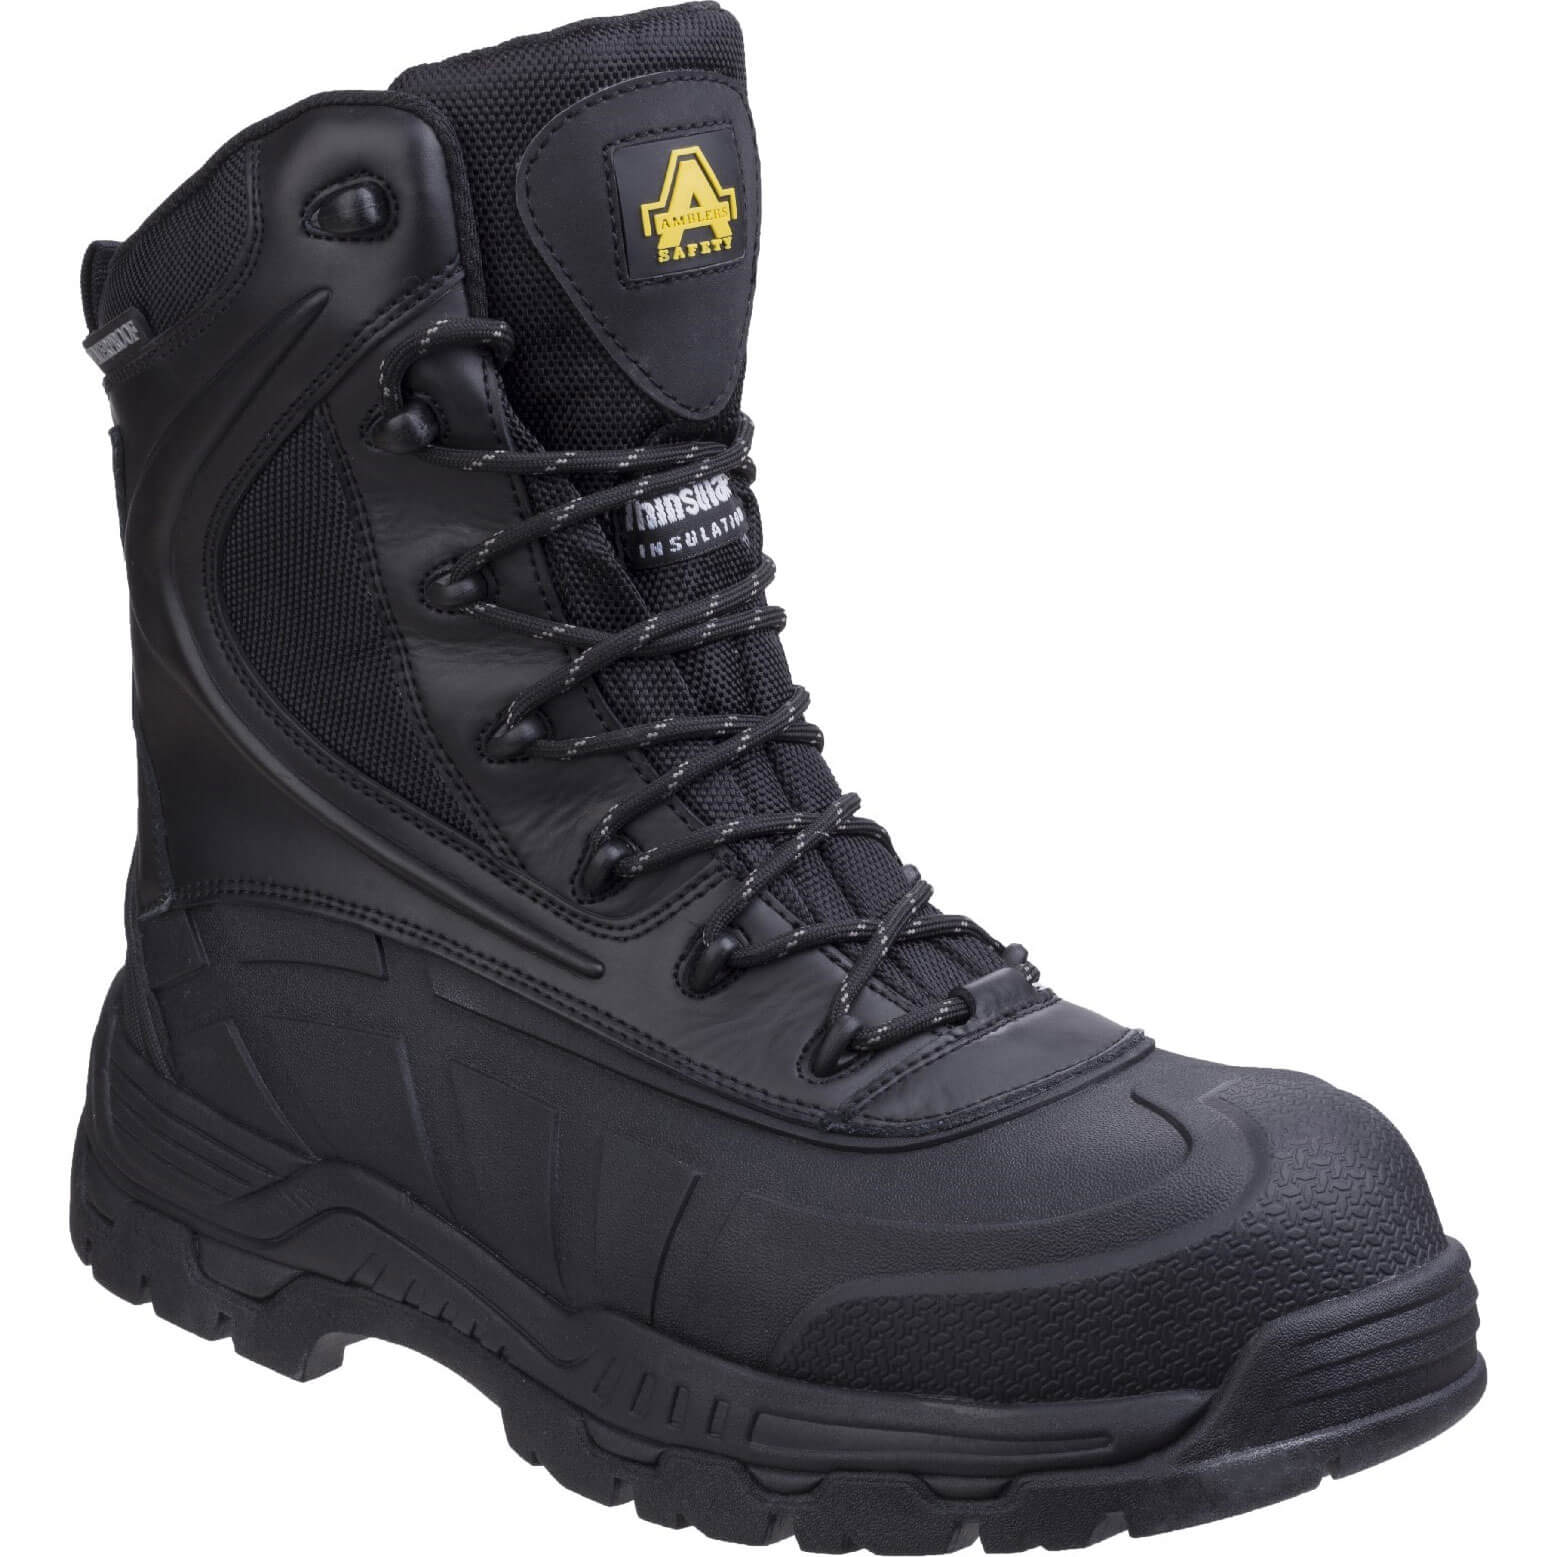 Photo of Amblers Mens Safety As440 Hybrid Metal Free Hi-leg Waterproof Safety Boots Black Size 11